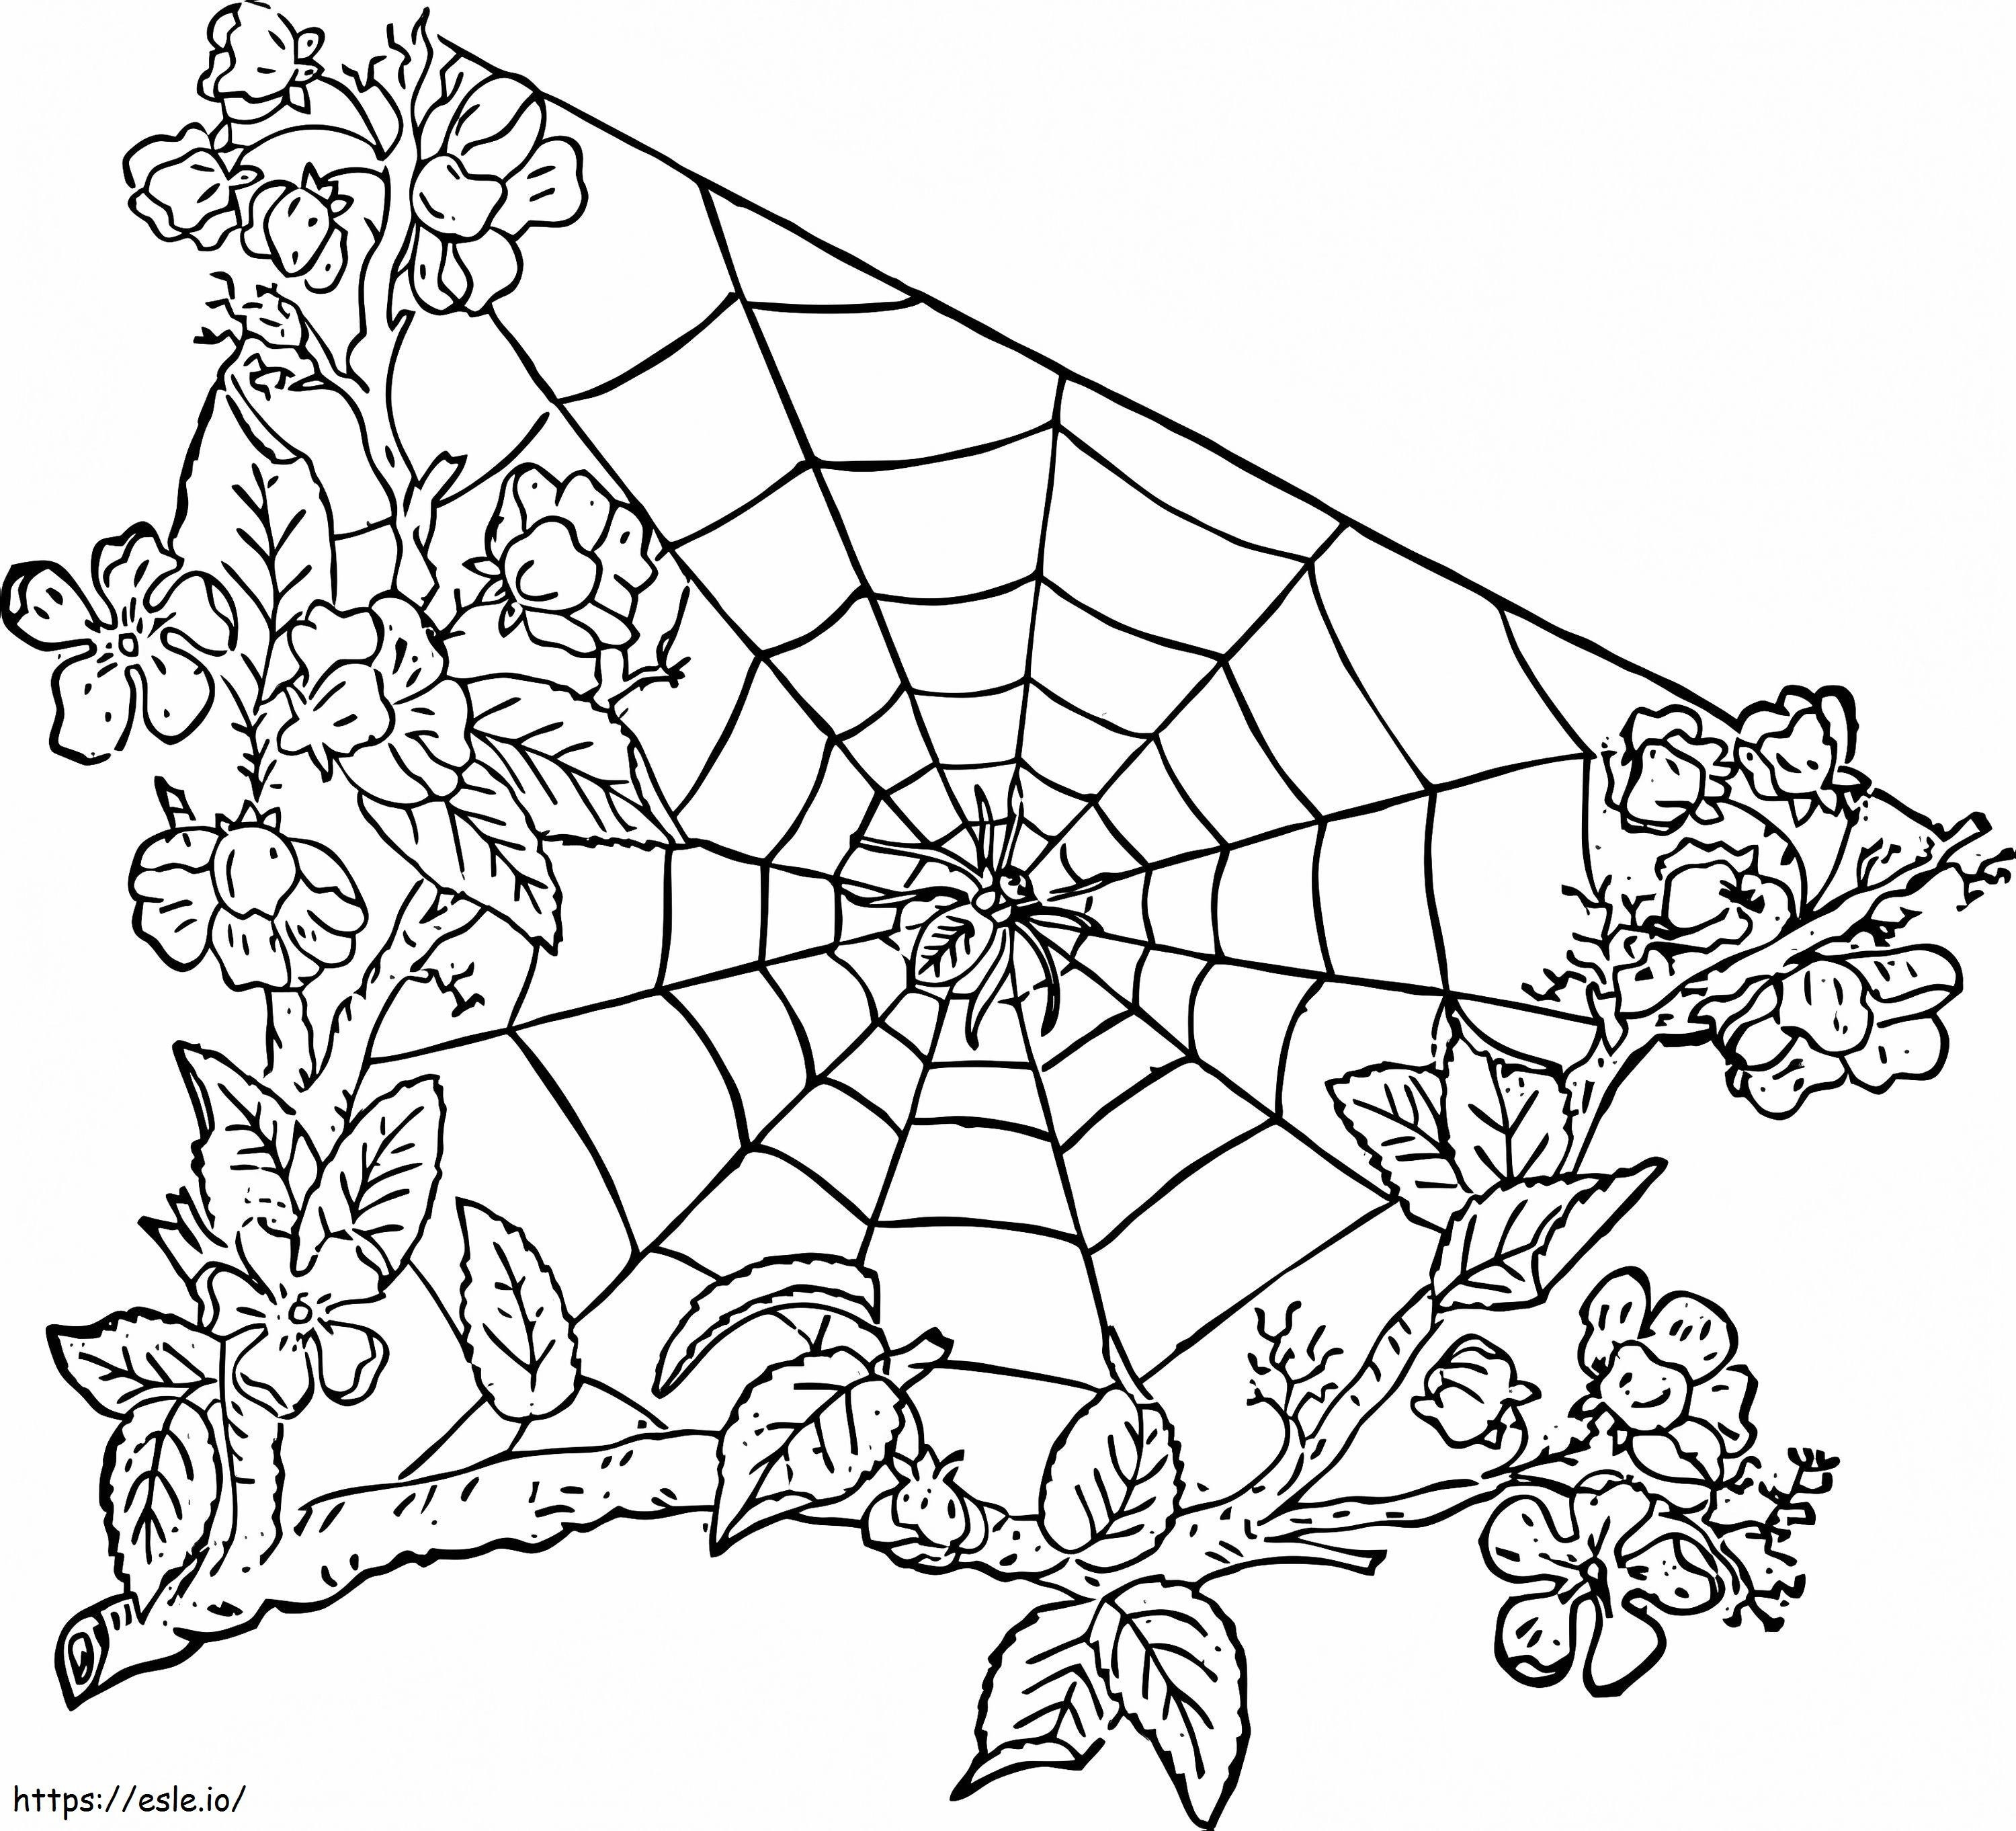 Spider On Spider Web 5 coloring page